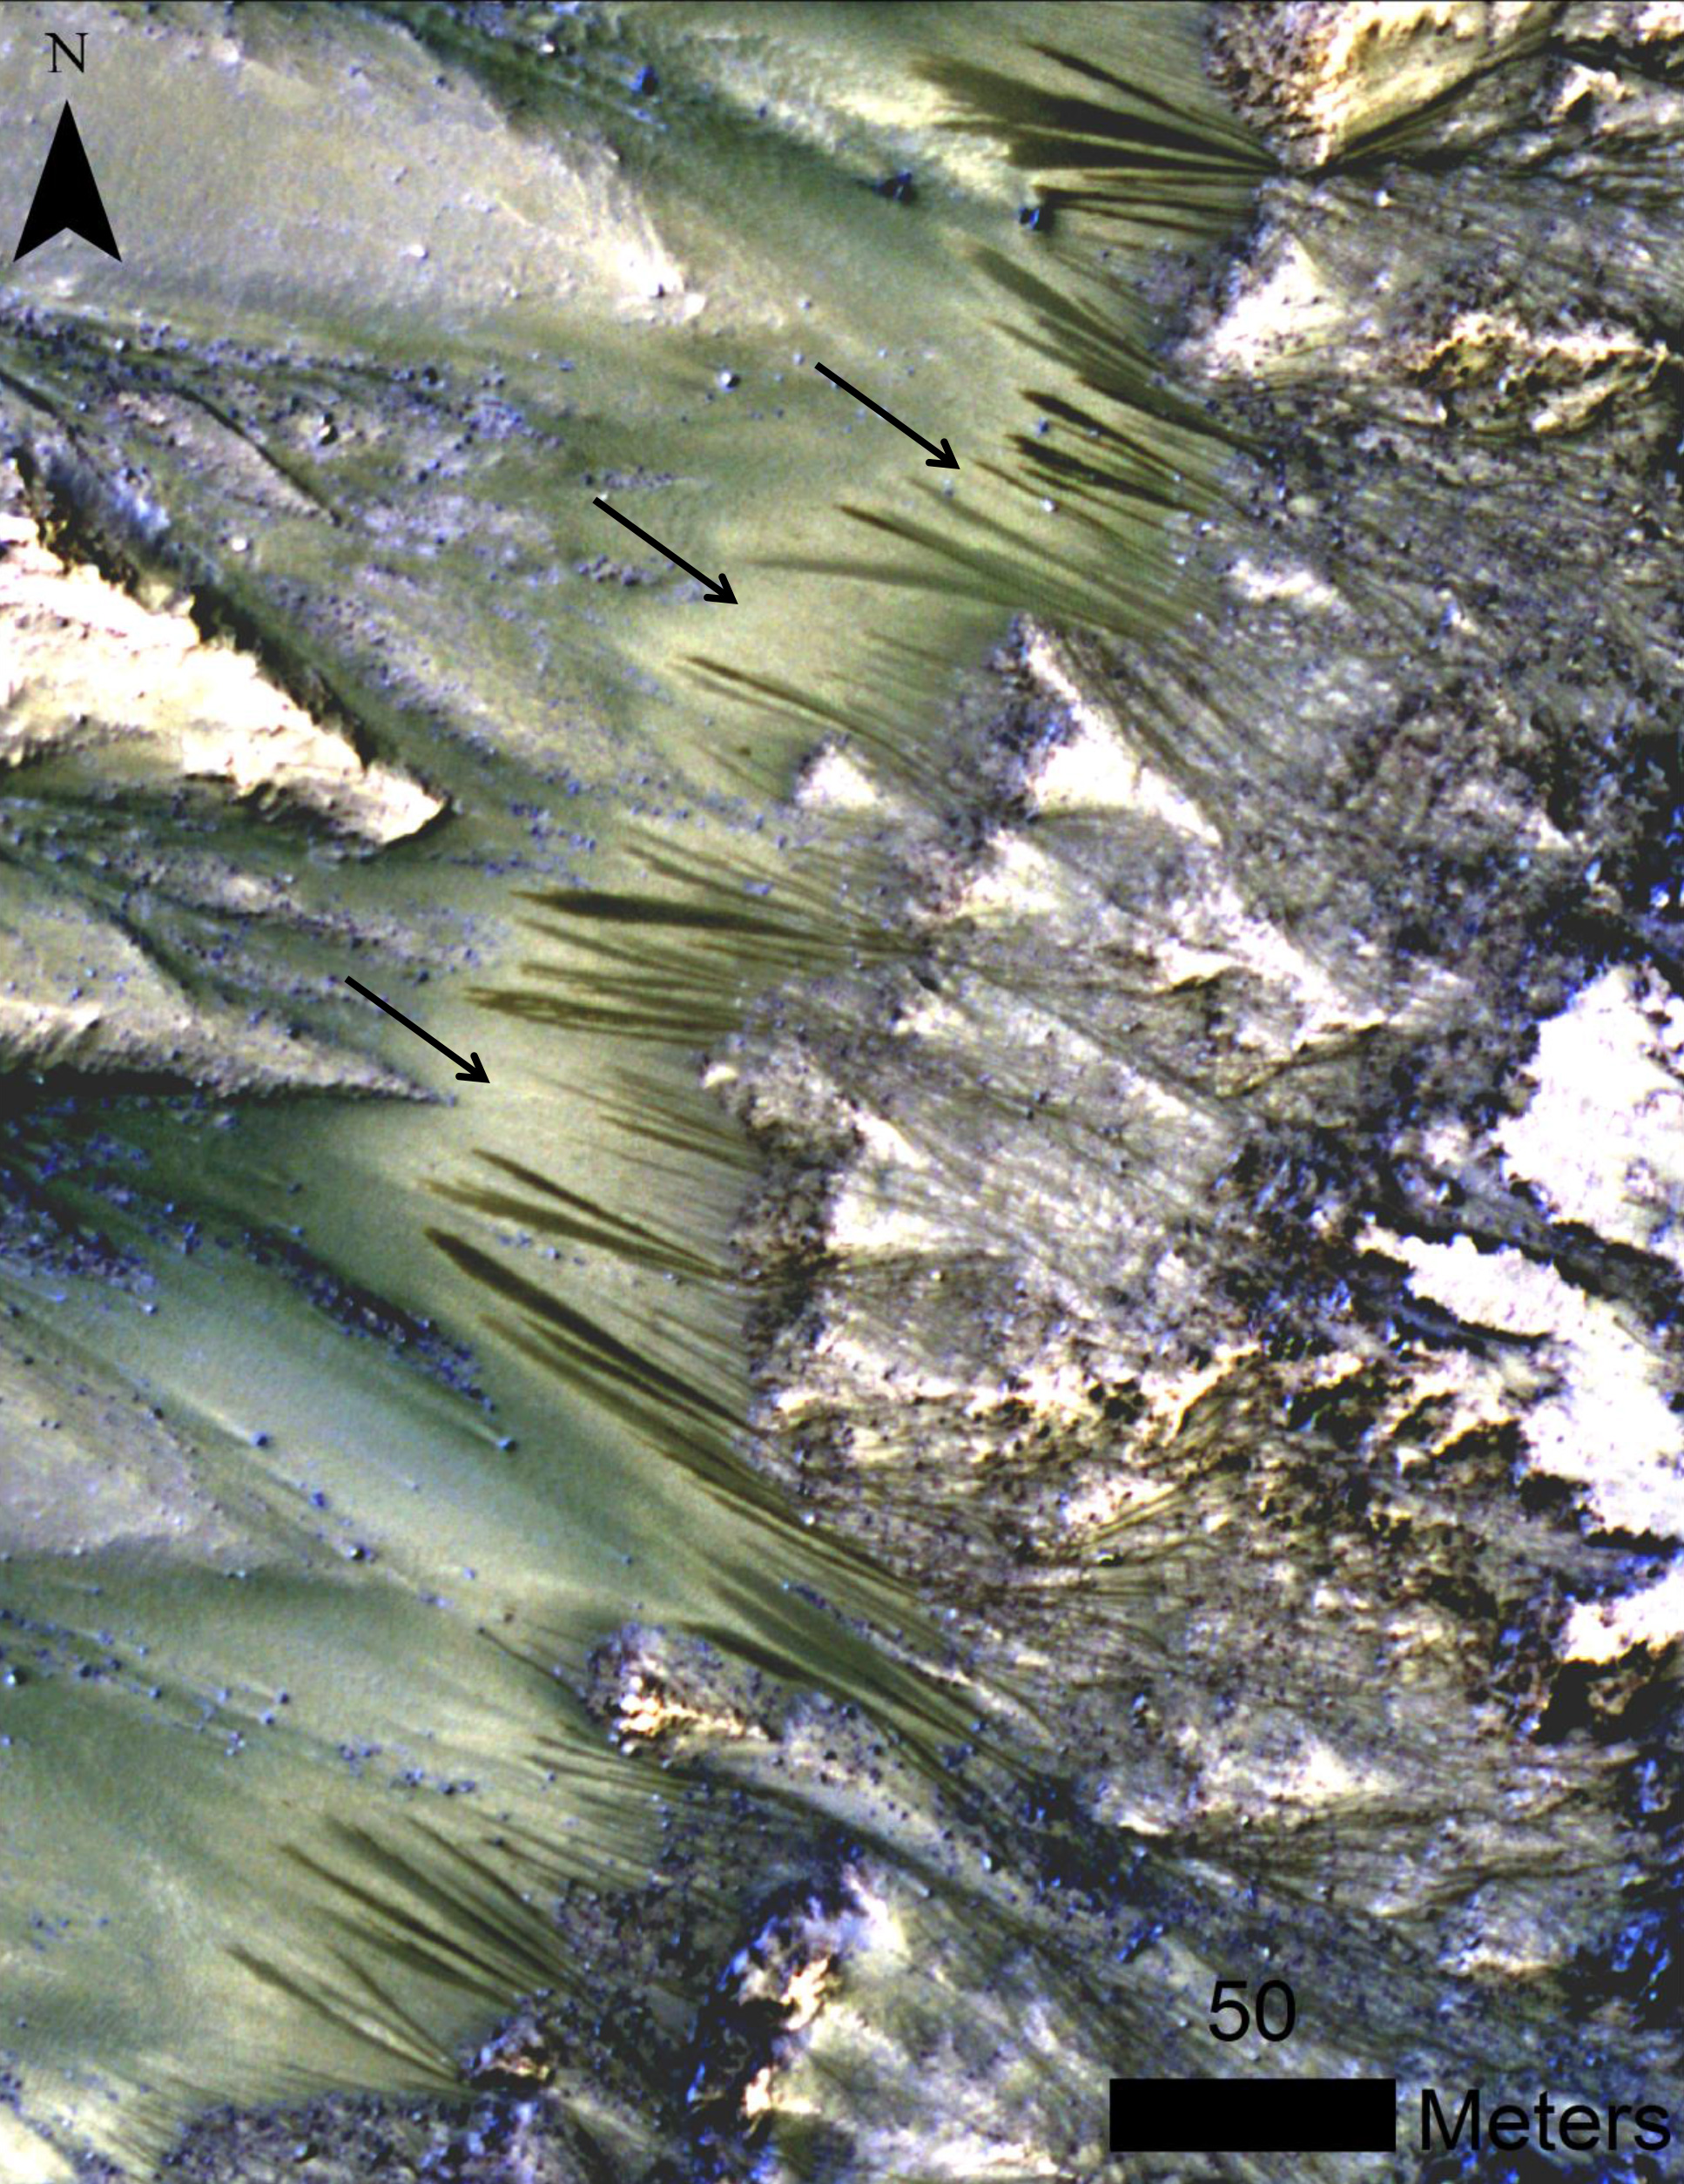 Dark flow like features called Recurring Slope Lineae emanating from bedrock exposures at Palikir crater on Mars during southern summer. These flows are observed to form and grow during warm seasons when surface temperature is hot enough for salty ice to melt, and fade or completely disappear in cold season. Arrows point to bright, smooth fans left behind by flows.